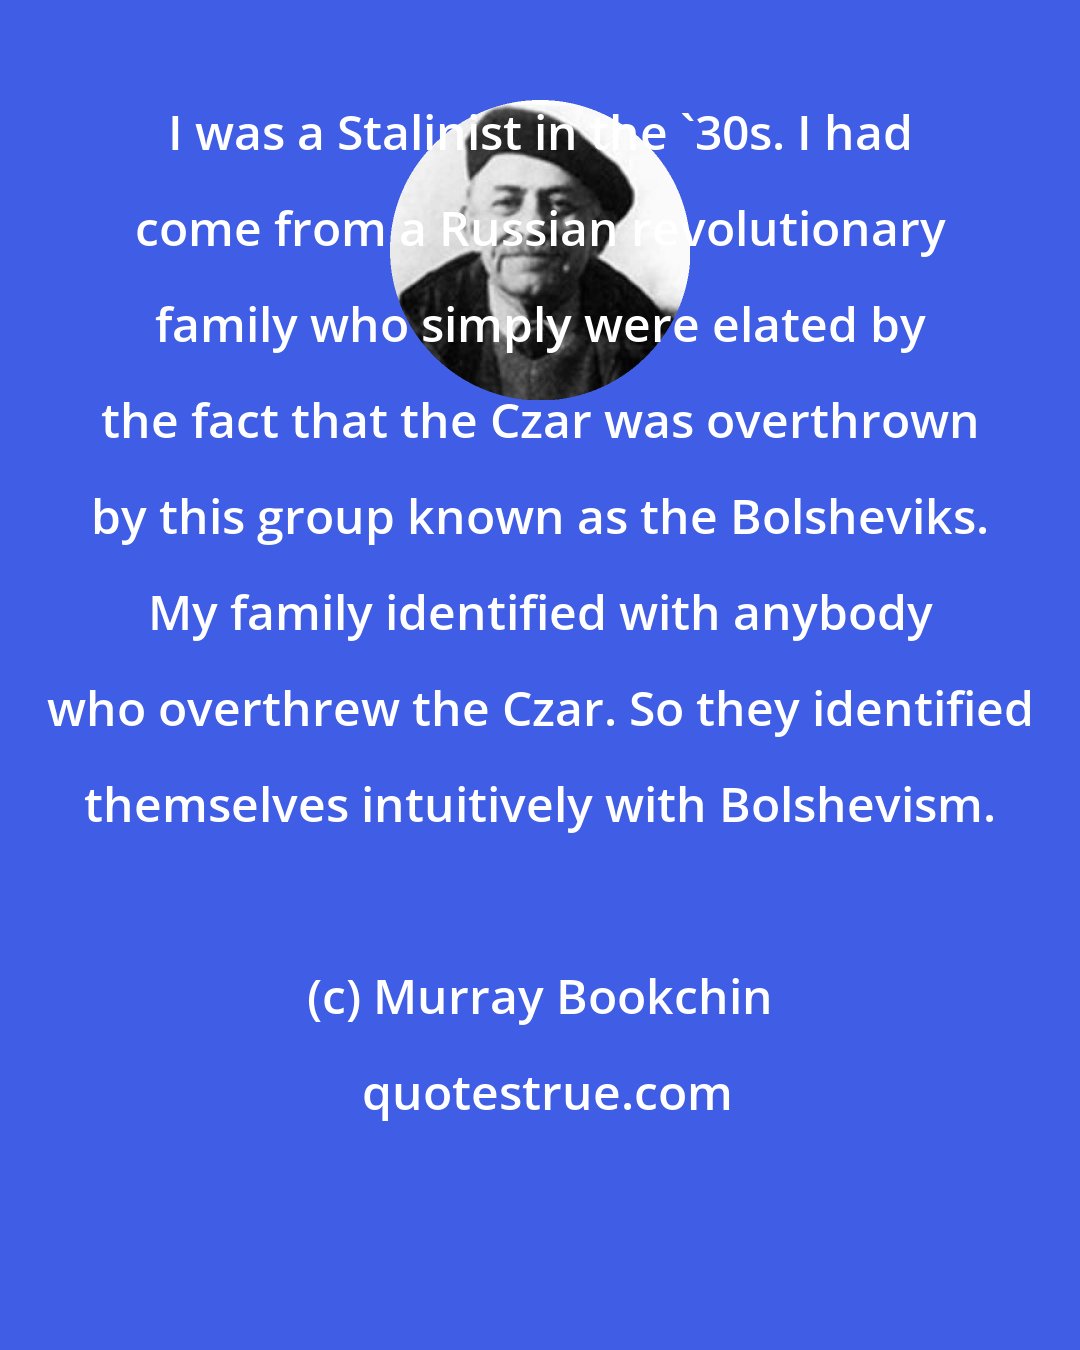 Murray Bookchin: I was a Stalinist in the '30s. I had come from a Russian revolutionary family who simply were elated by the fact that the Czar was overthrown by this group known as the Bolsheviks. My family identified with anybody who overthrew the Czar. So they identified themselves intuitively with Bolshevism.